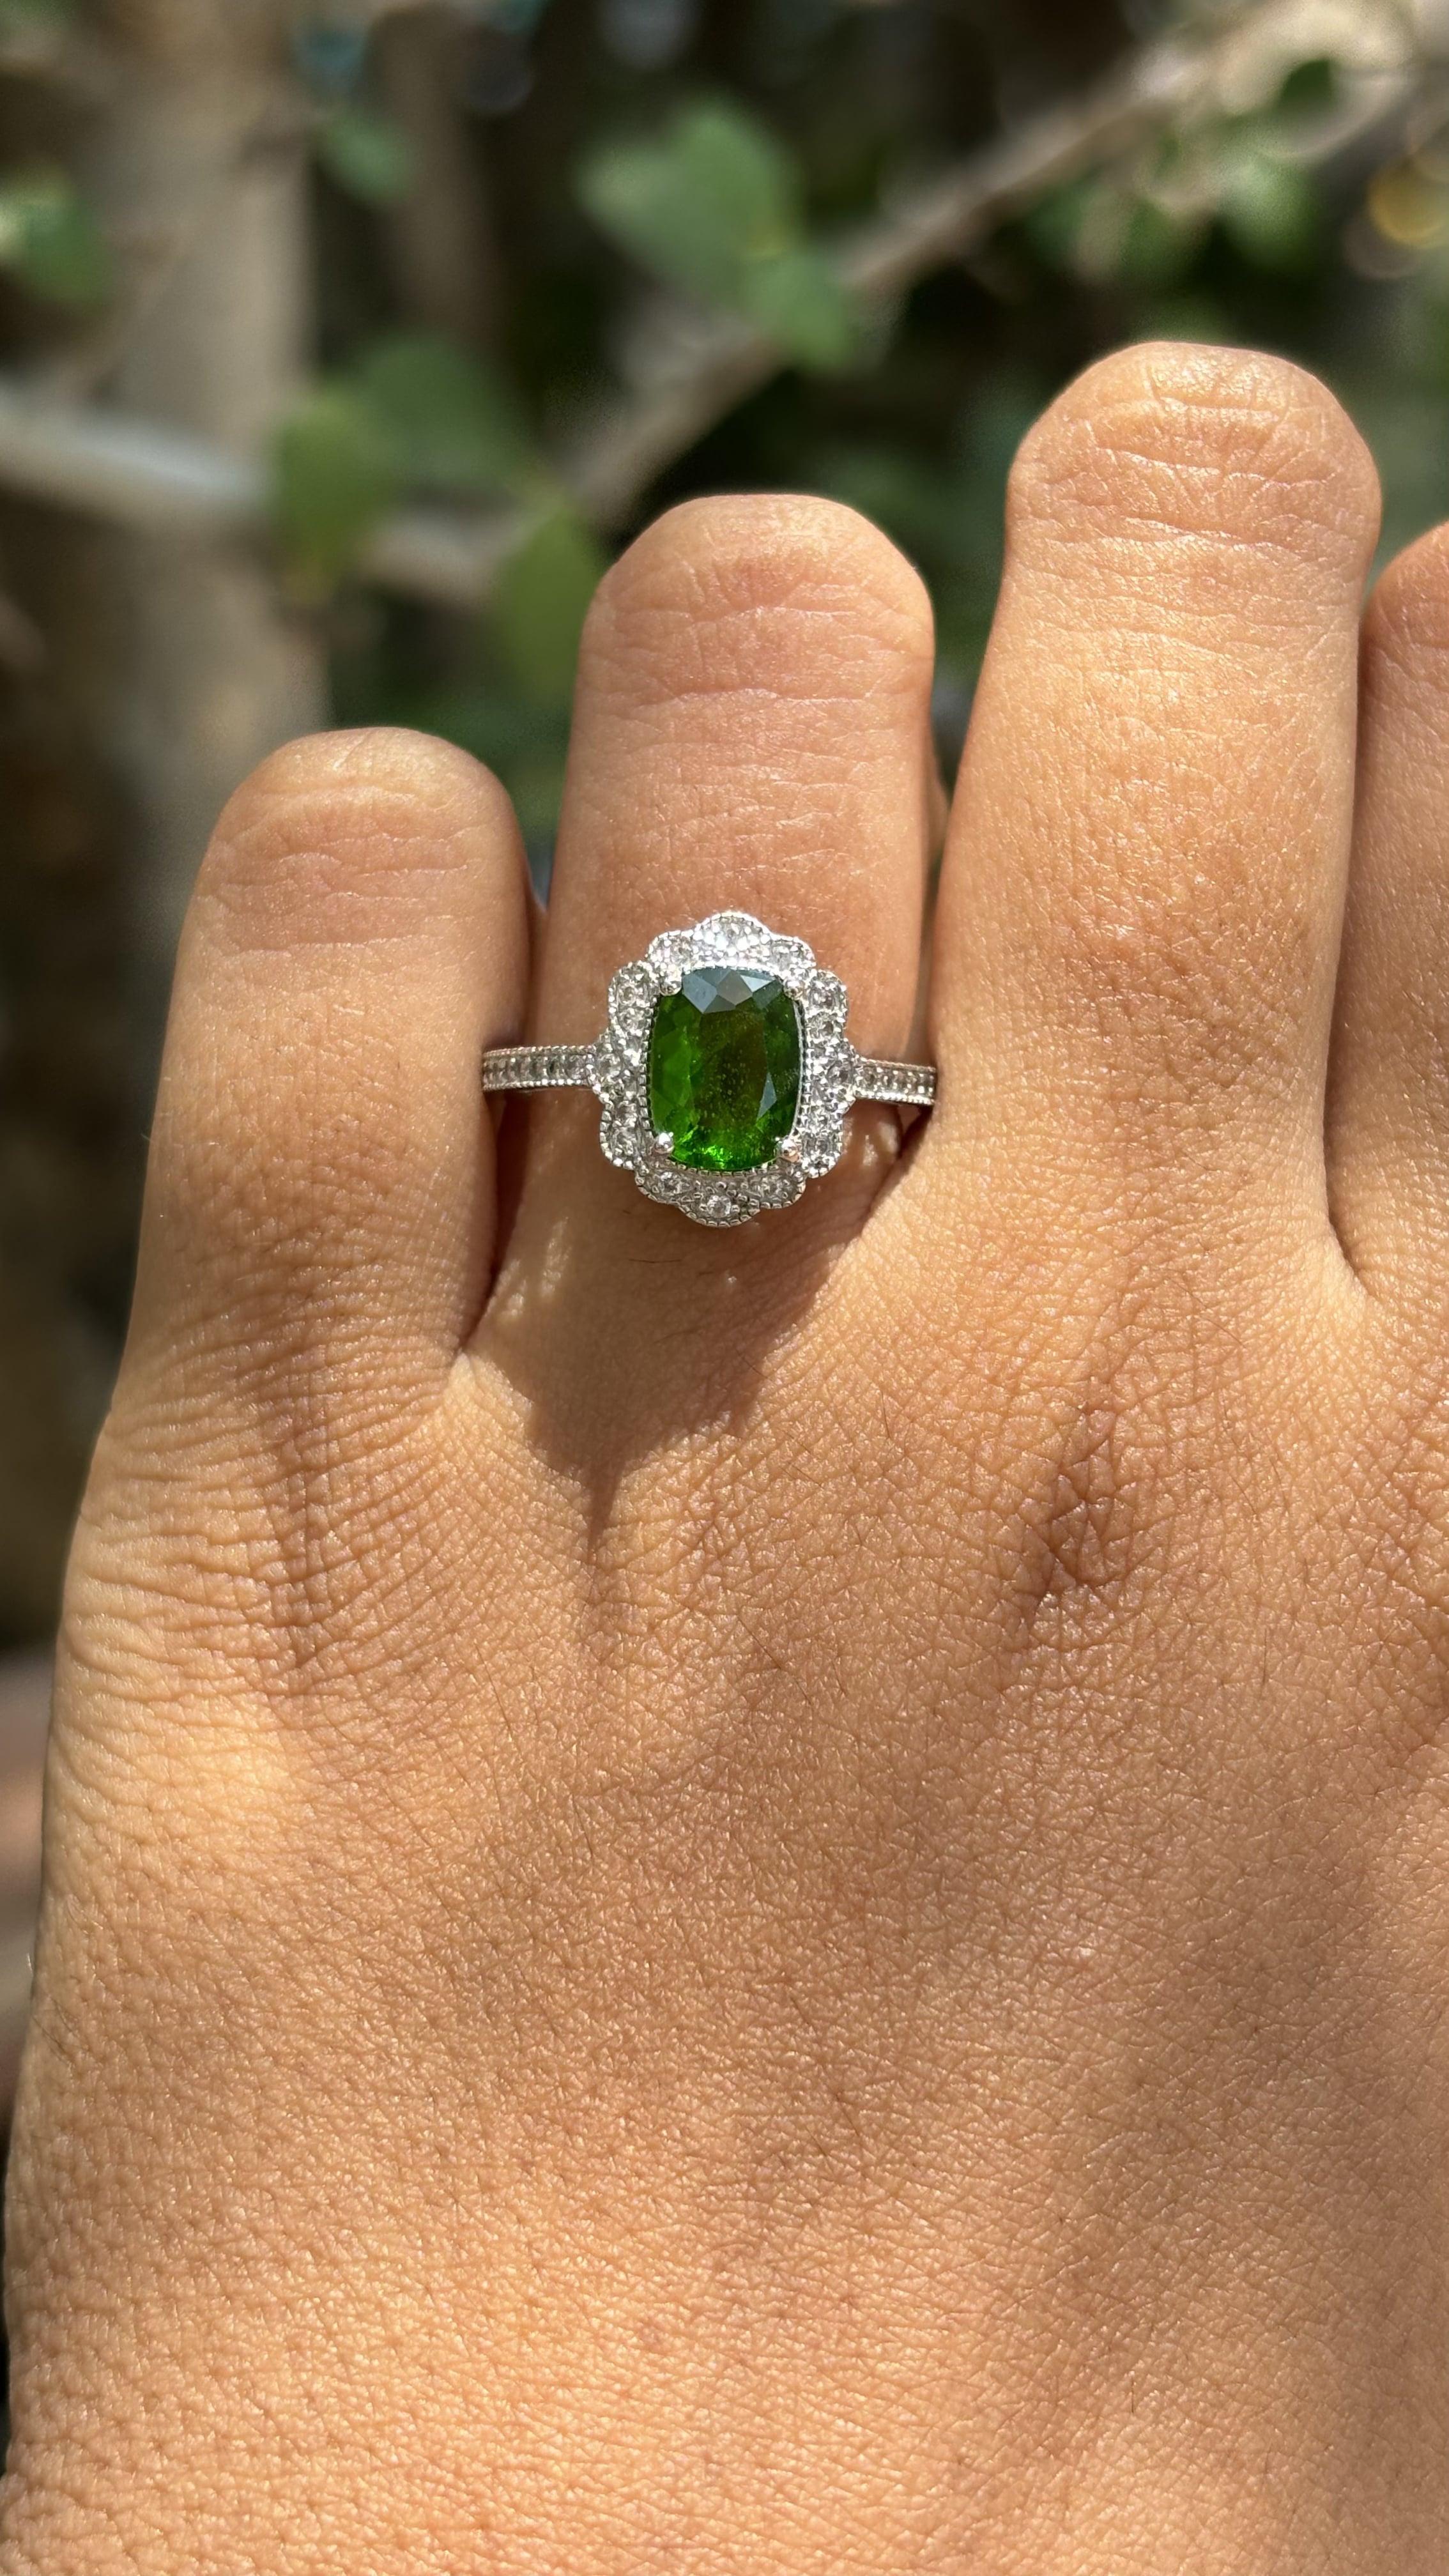 Antique circa 1900s Diopside & CZ Ring in Silver 1